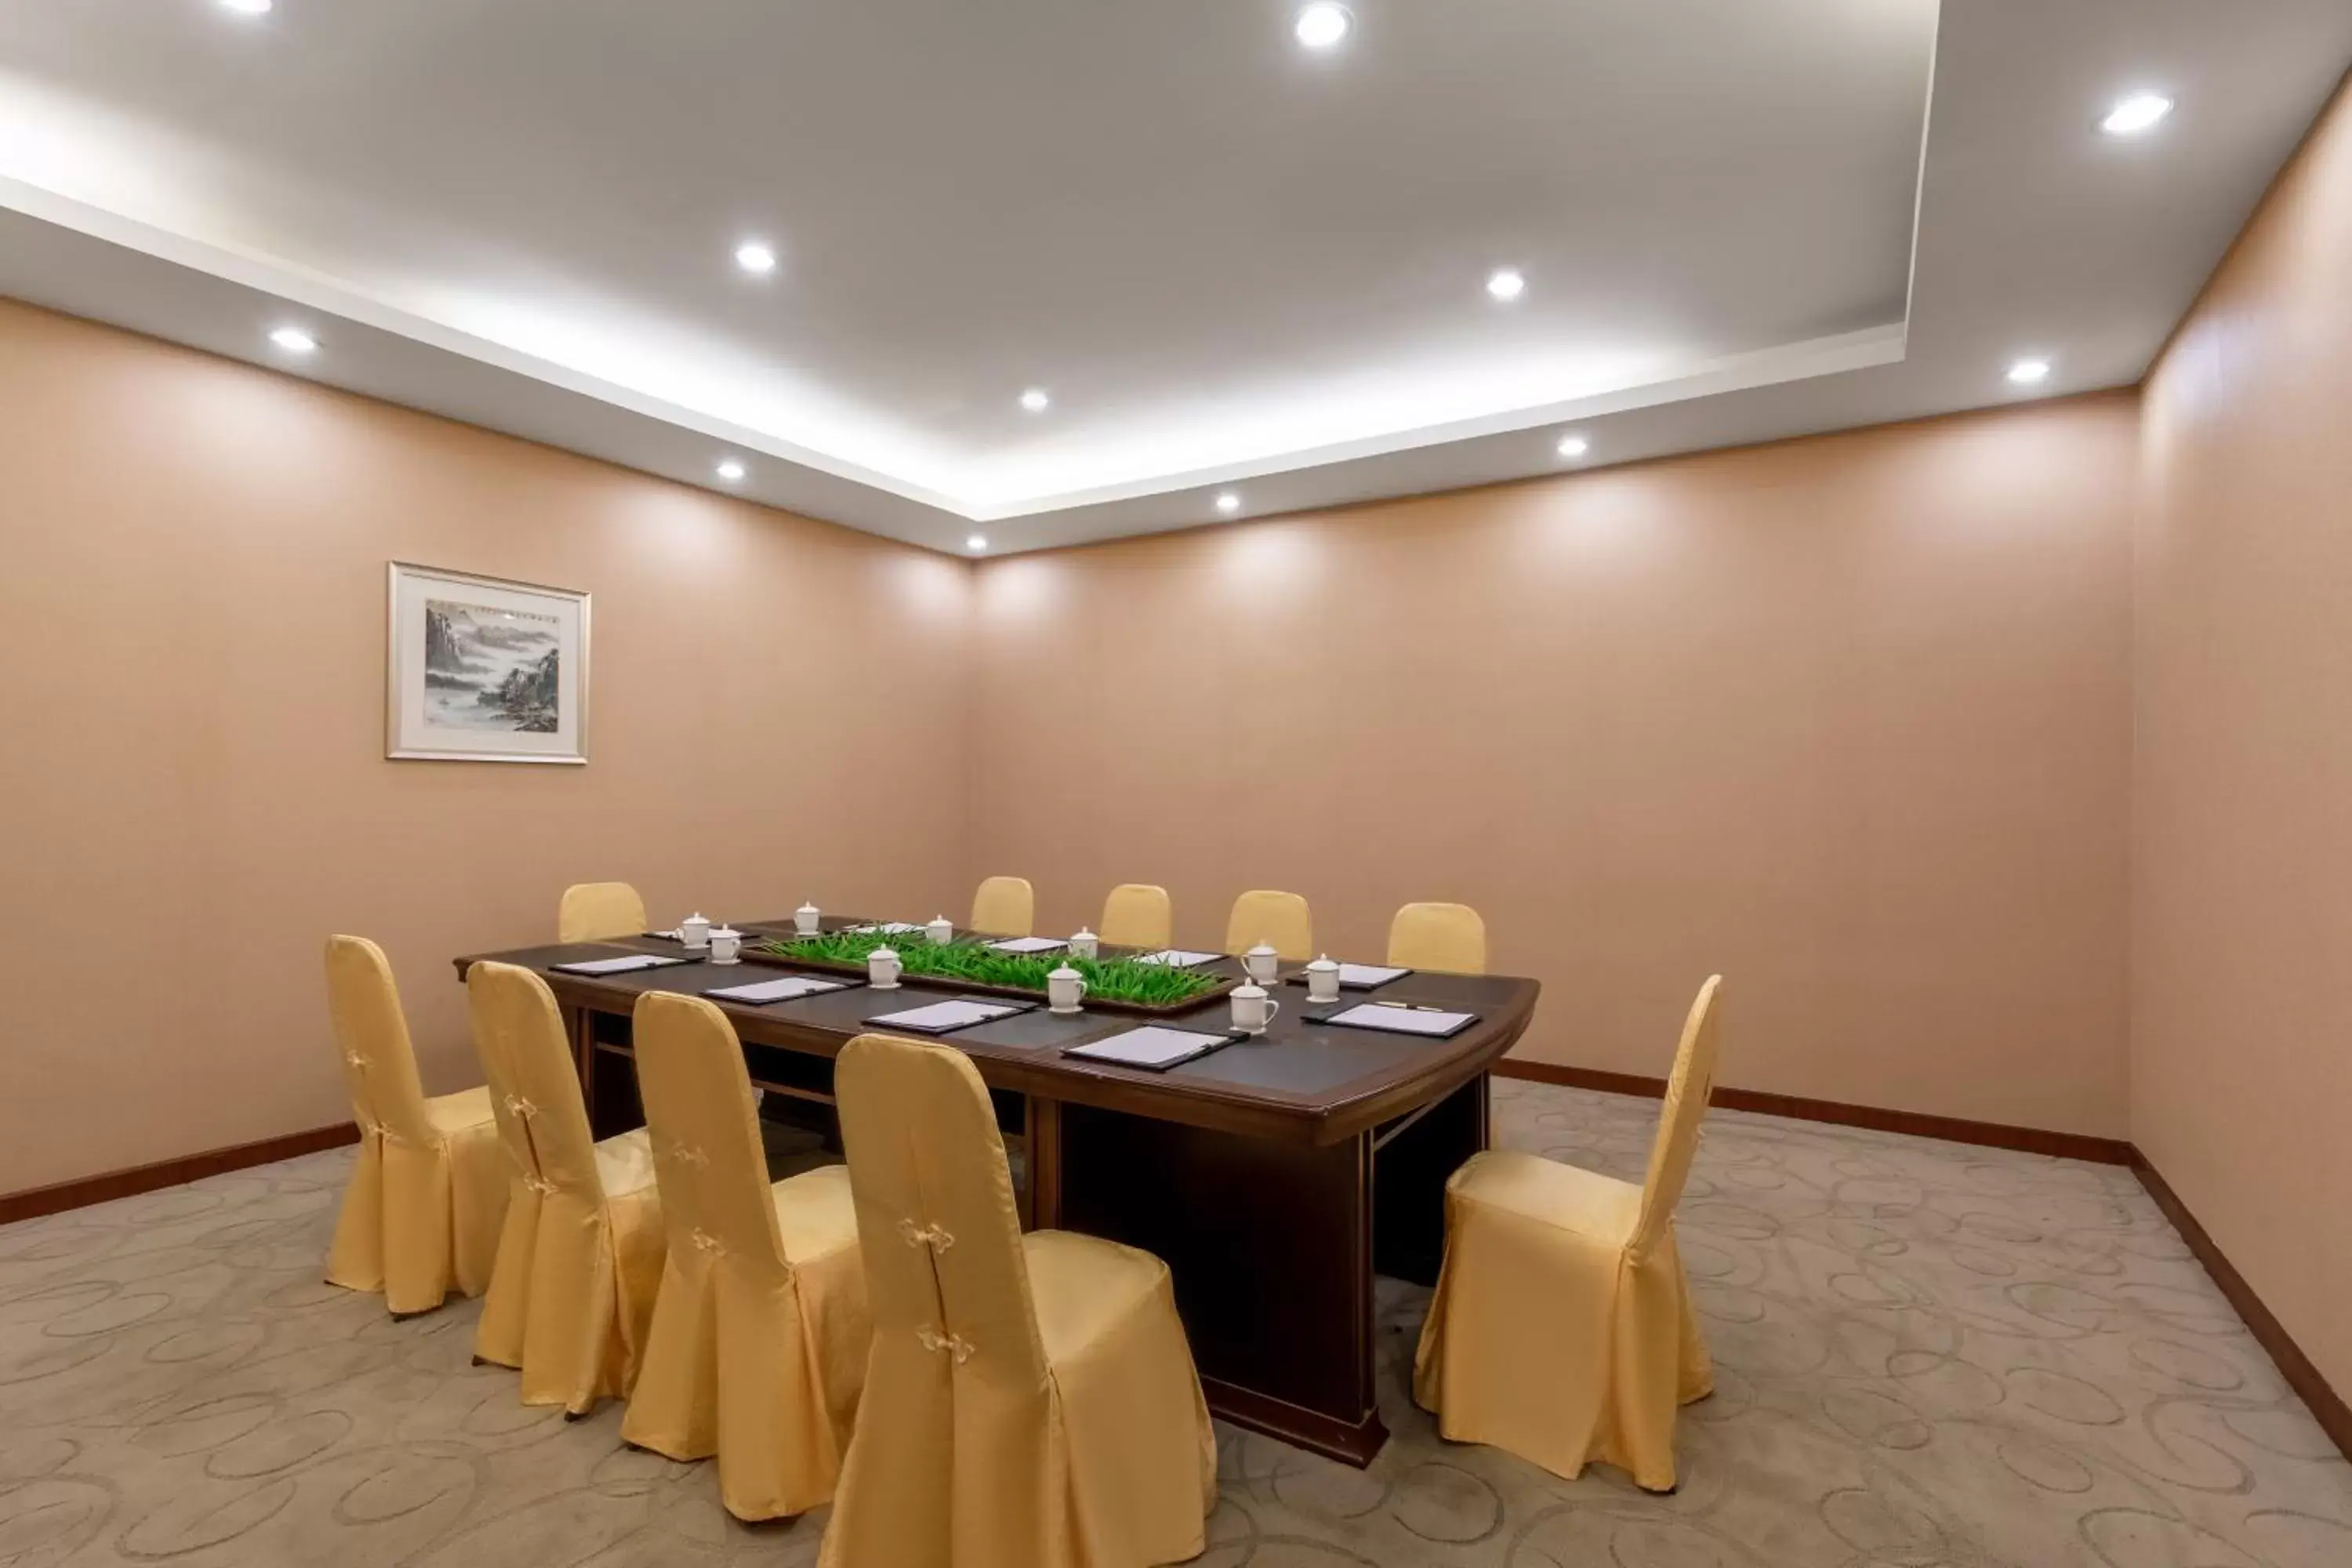 Meeting/conference room in Guangdong Hotel (Zhuhai)